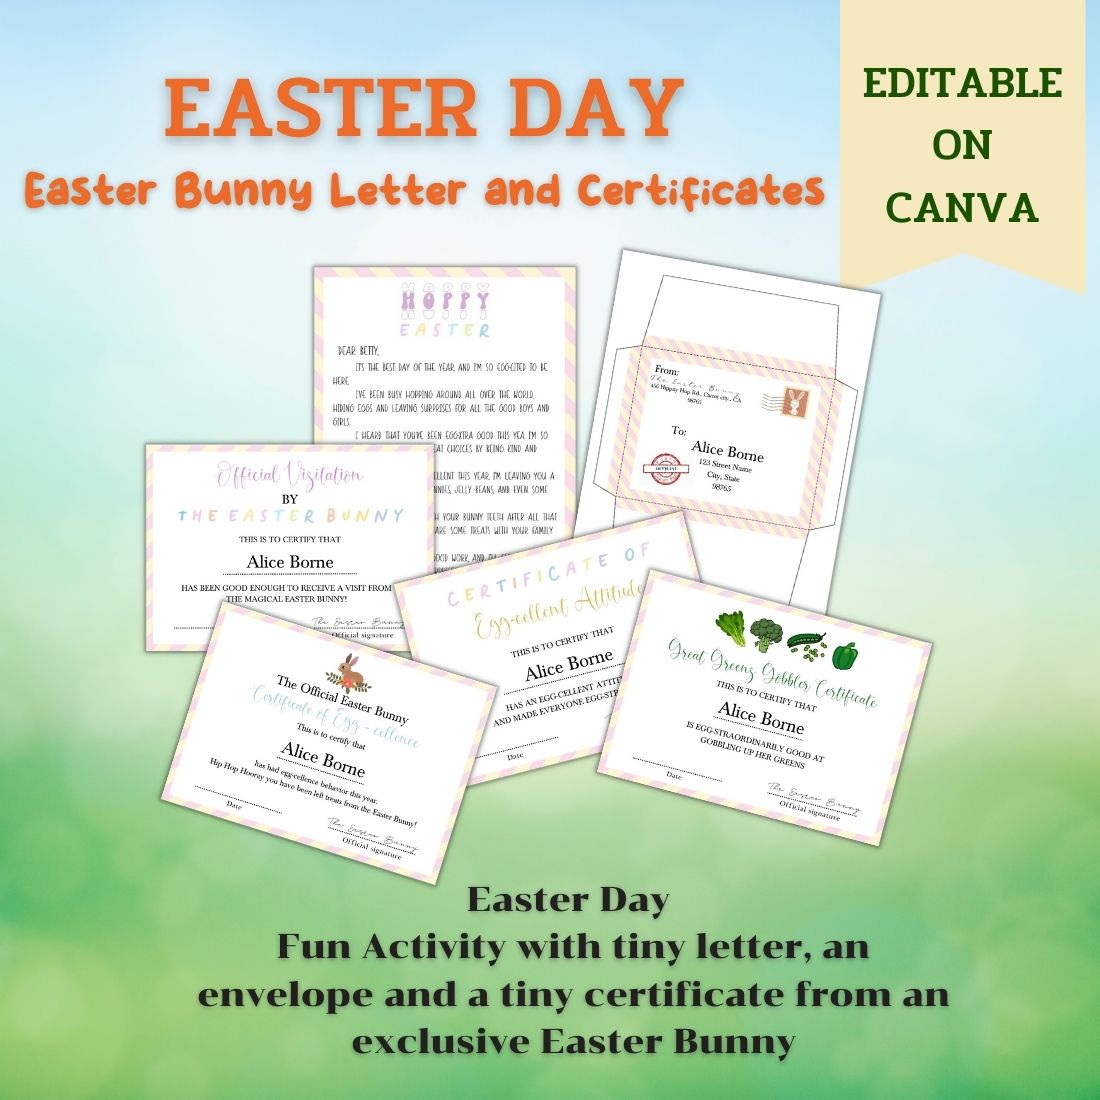 EDITABLE Letter from Easter Bunny and certificates cover image.